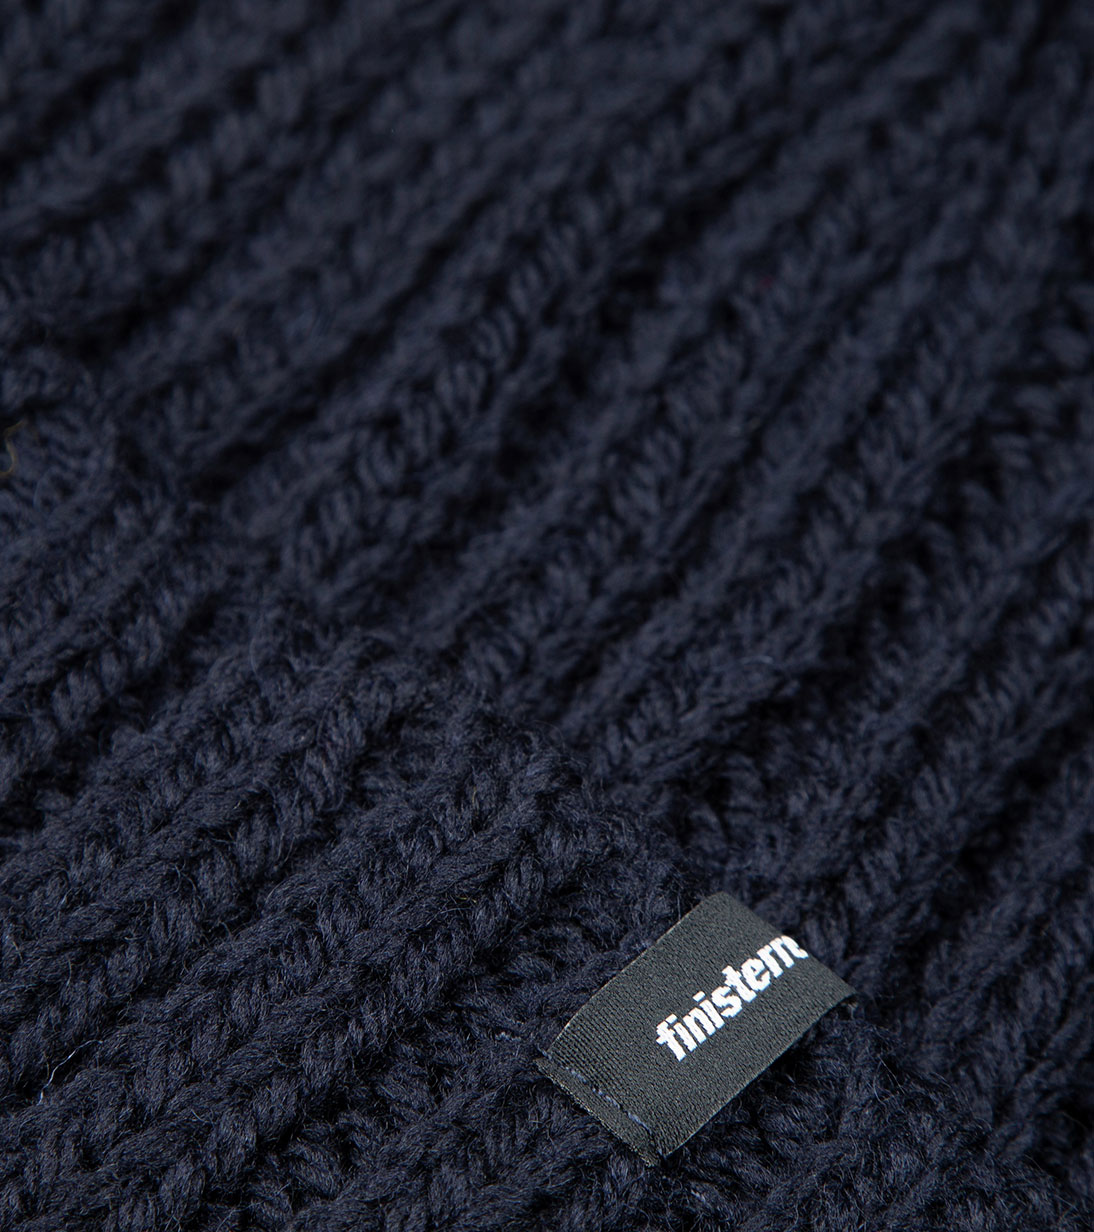 Made from: 80% Merino Wool blend